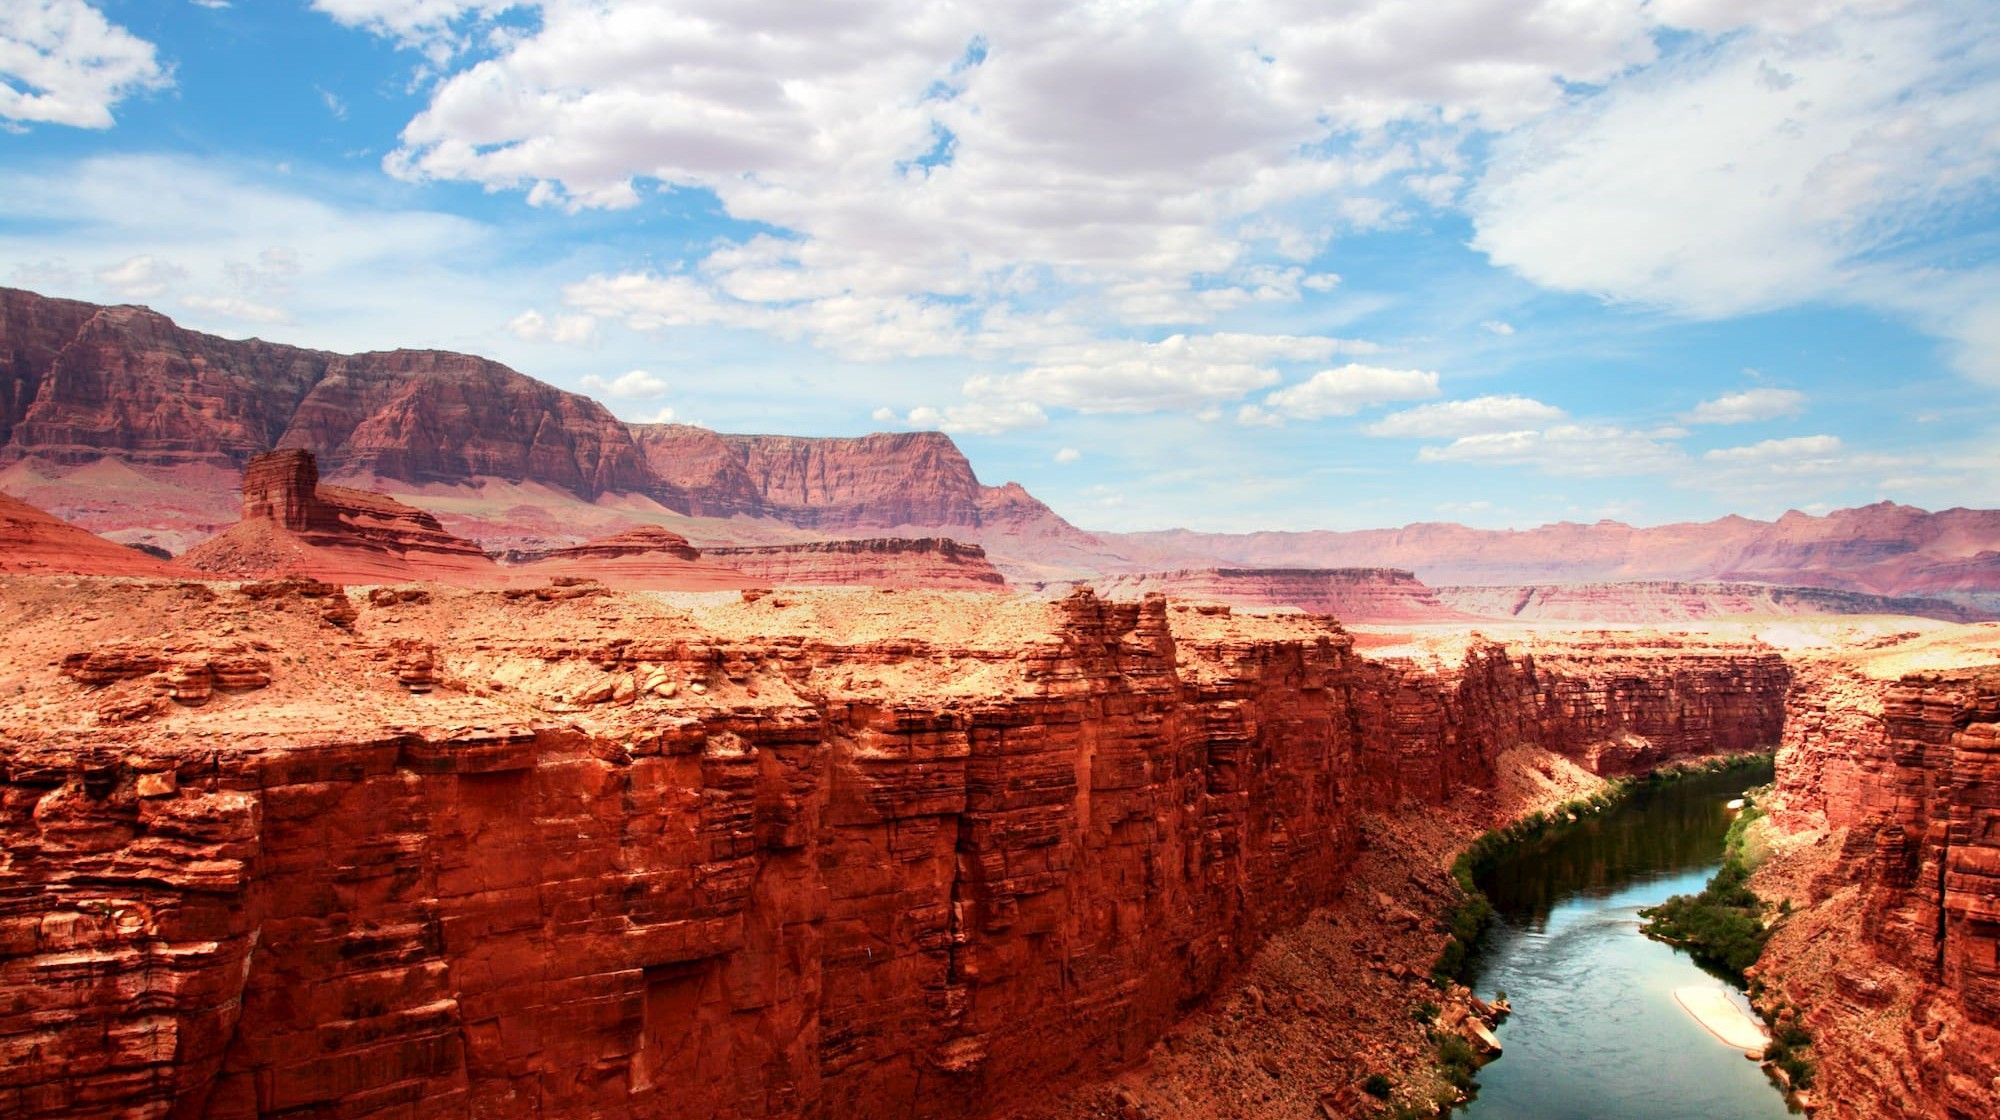 Arizona’s Vermilion Cliffs National Monument Offers Striking Desert Scenery With